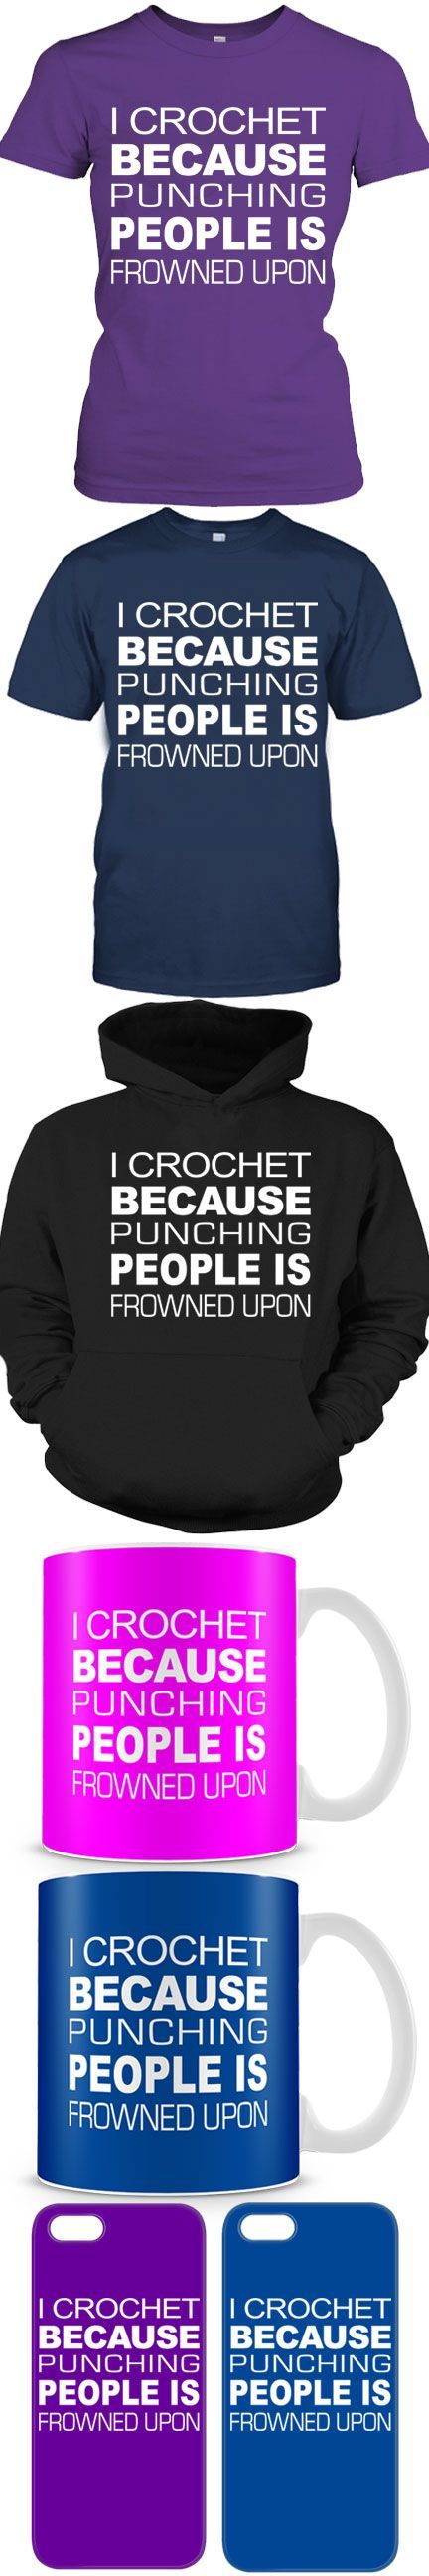 Love Crochet? Then Click The Image To Buy It Now or Tag Someone You Want To Buy This For.